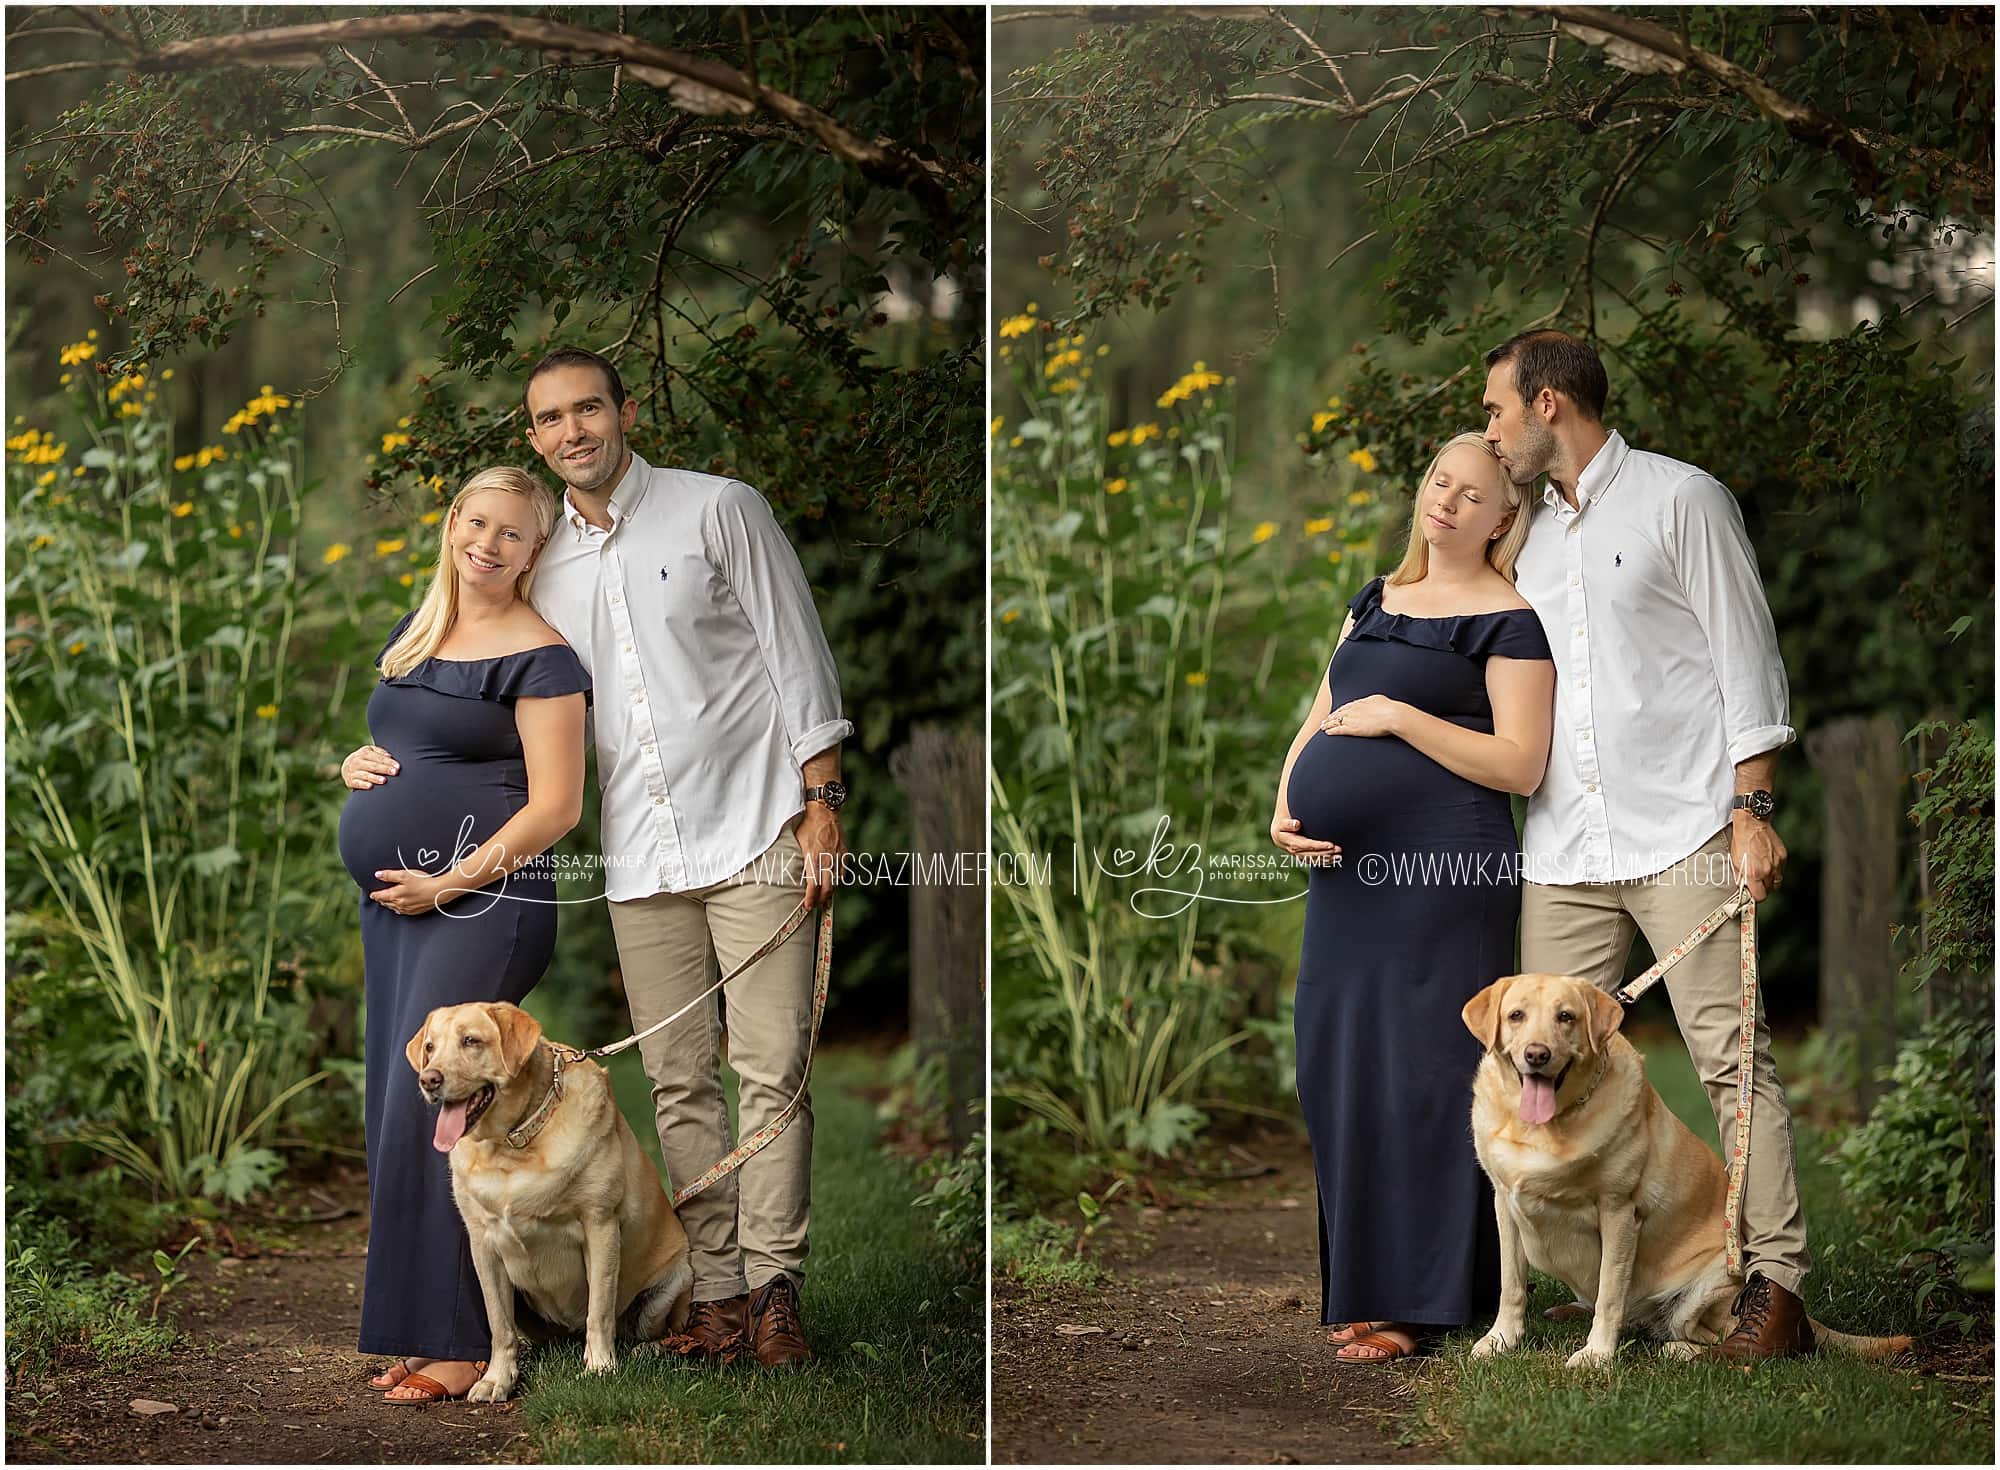 maternity photographer in camp hill pa, professional maternity photos, pregnancy photography camp hill pa